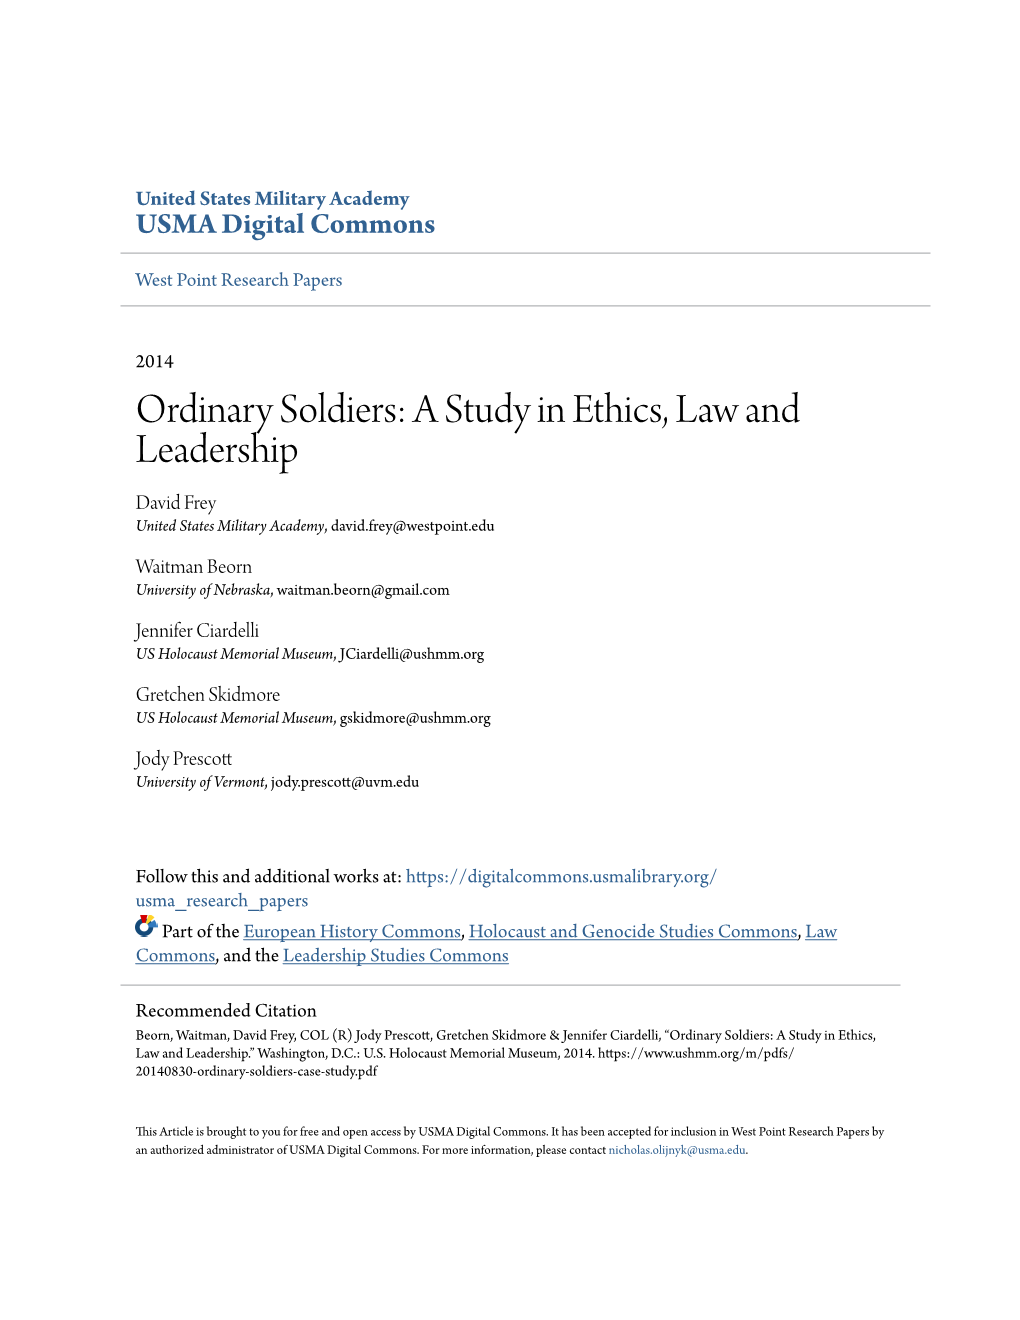 Ordinary Soldiers: a Study in Ethics, Law and Leadership David Frey United States Military Academy, David.Frey@Westpoint.Edu